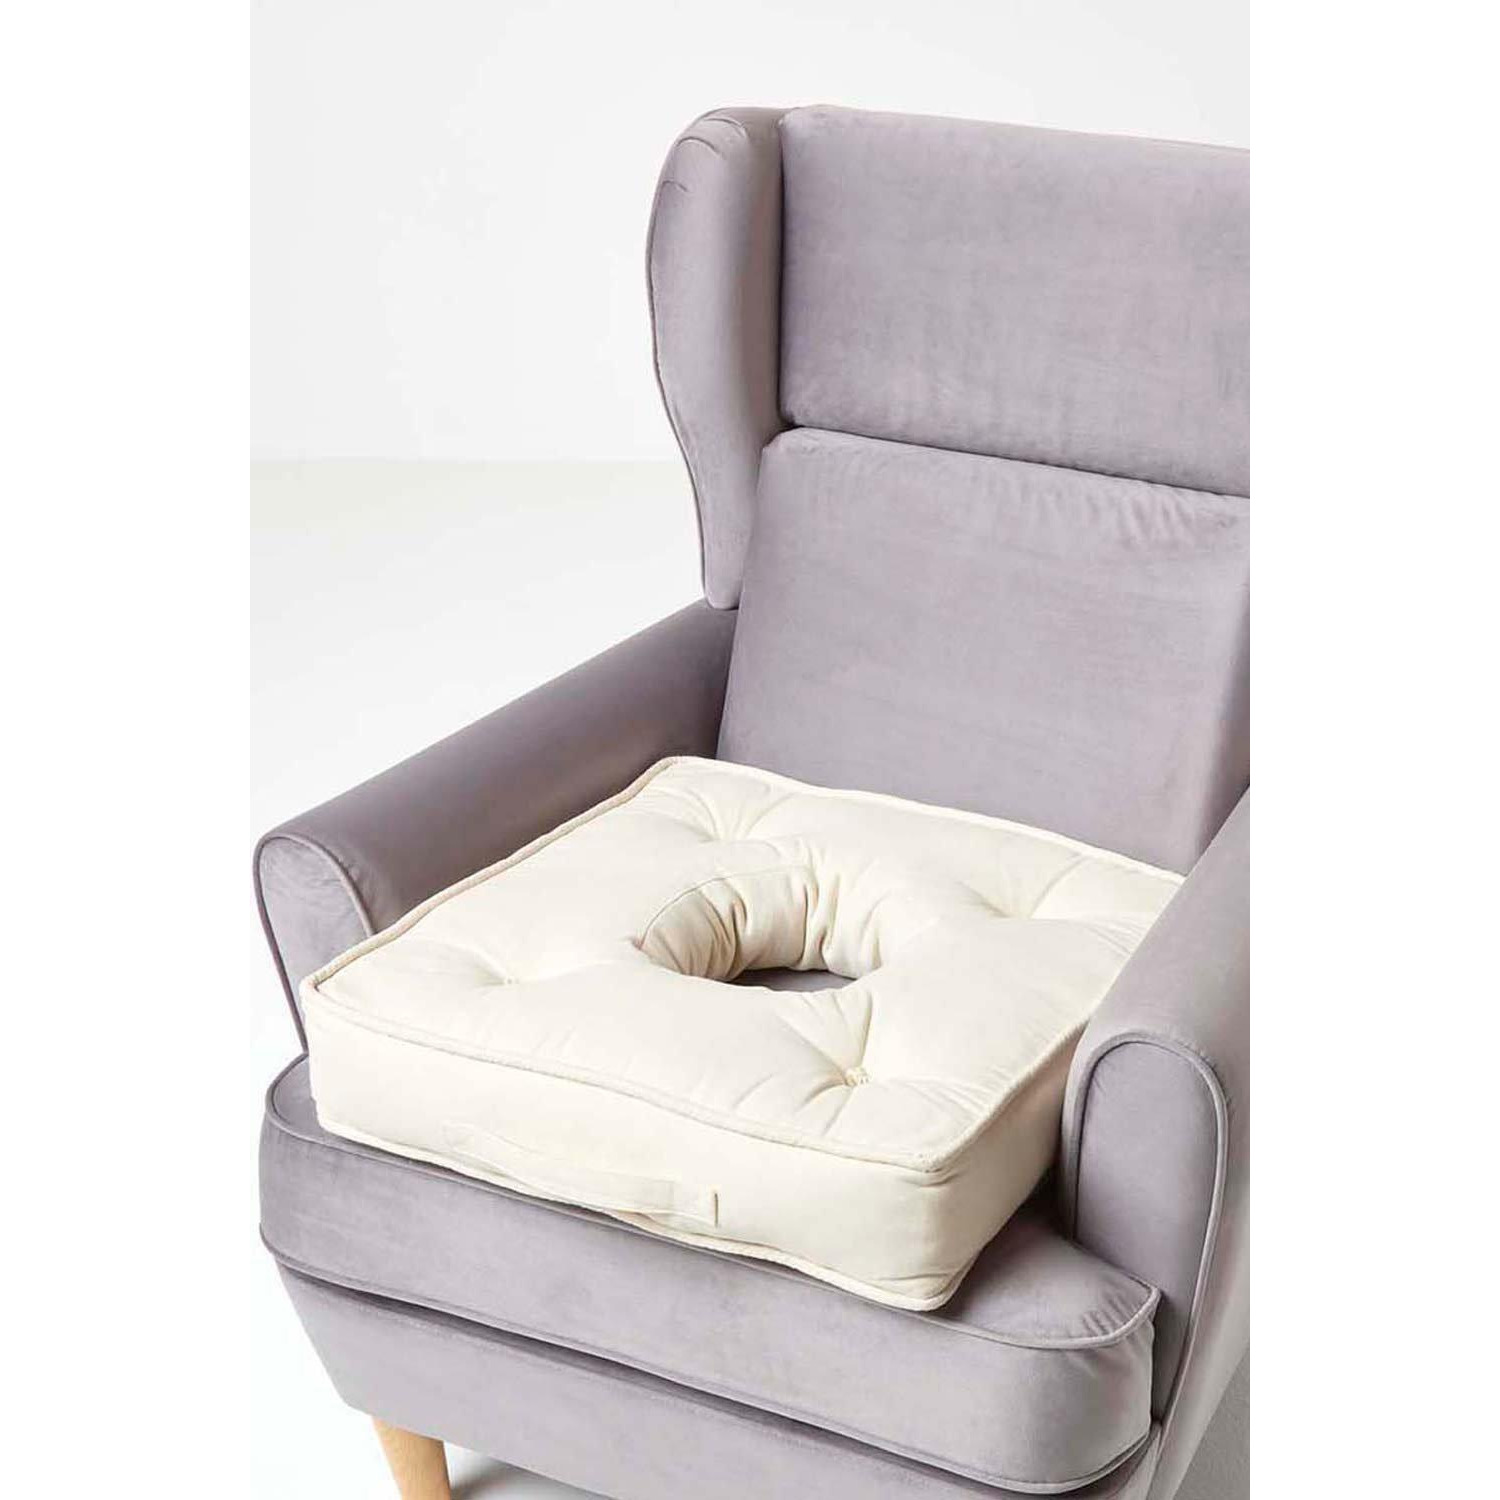 Pressure Relief Armchair Booster Cushion - image 1